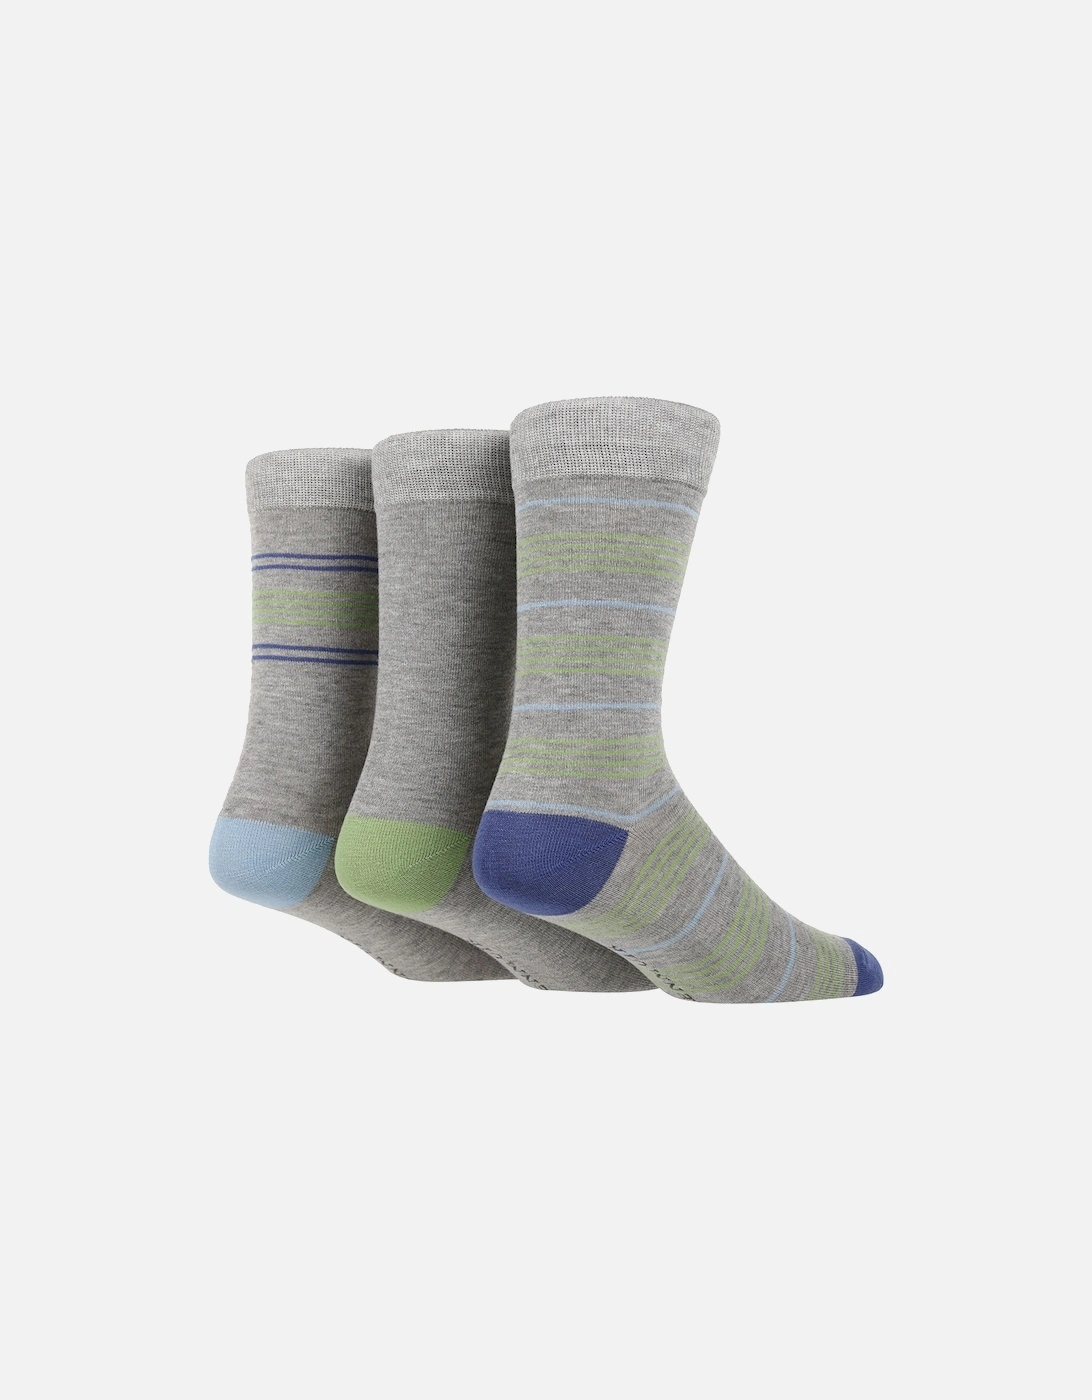 3 PAIR MENS BAMBOO SOCKS WITH THIN STRIPES, 2 of 1